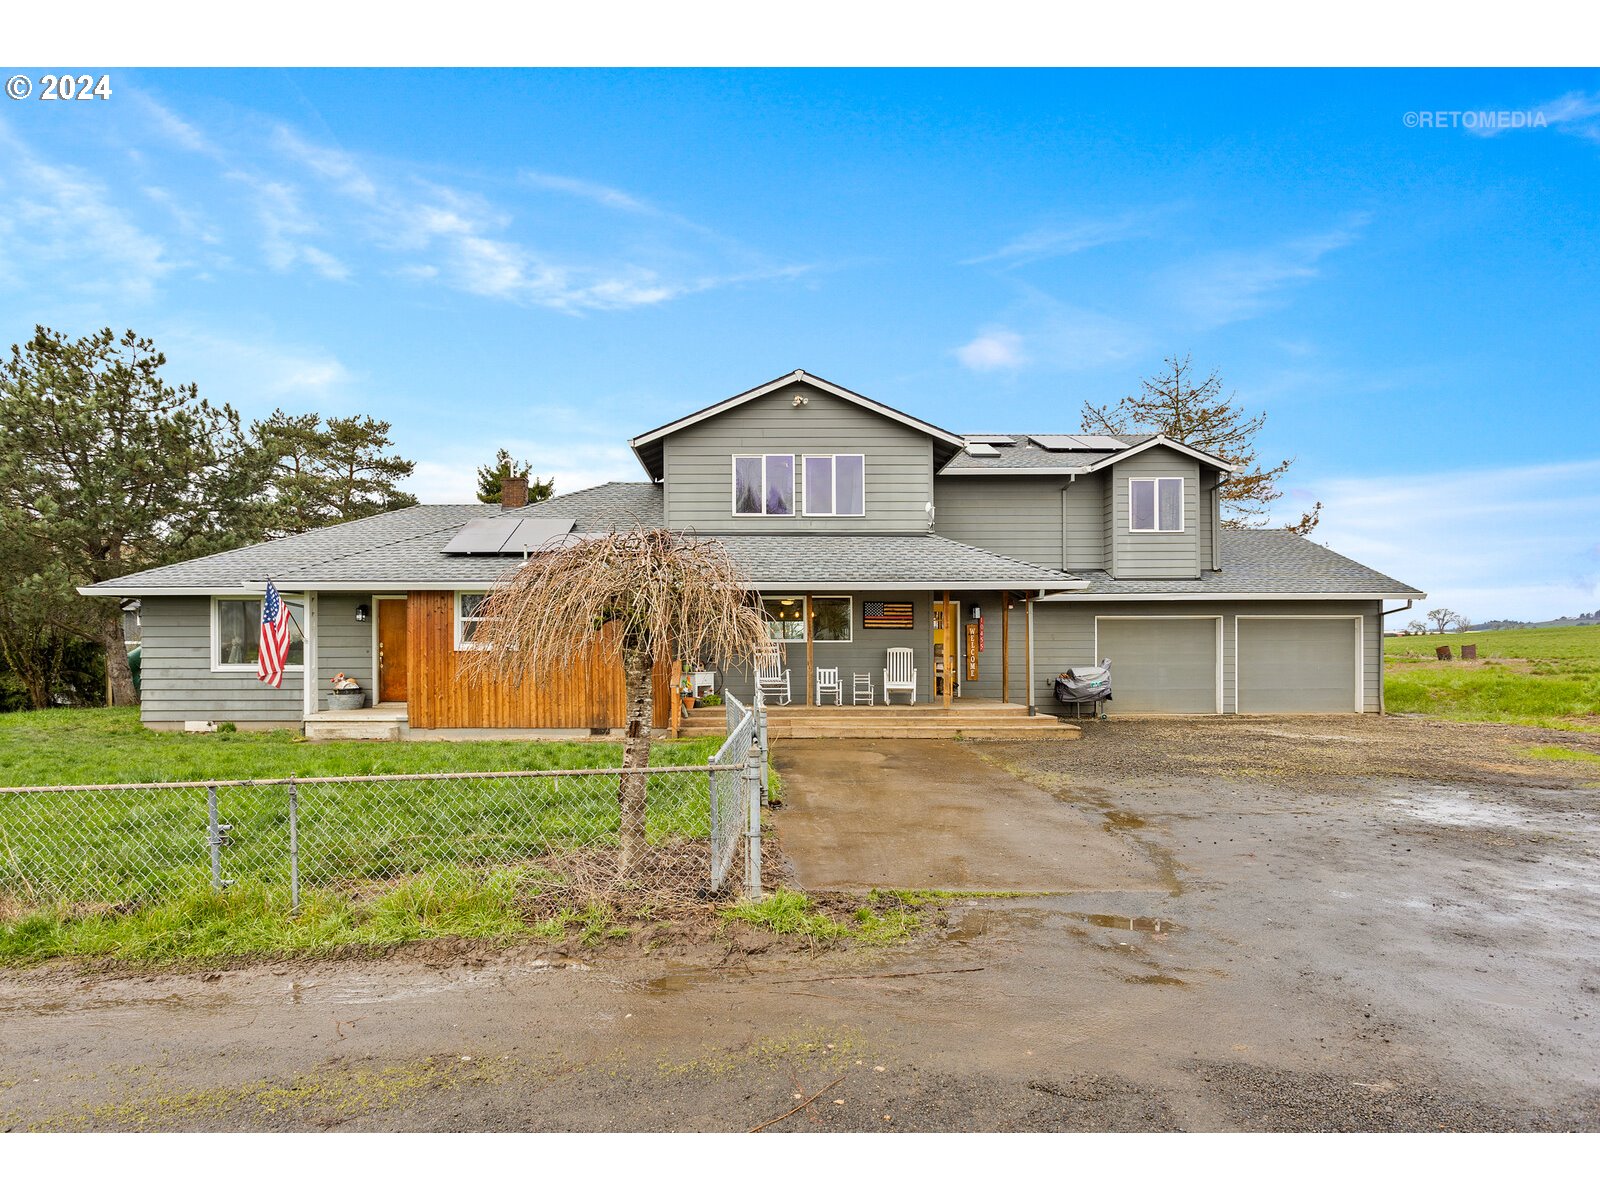 10455 NW ROY RD, Banks, OR 